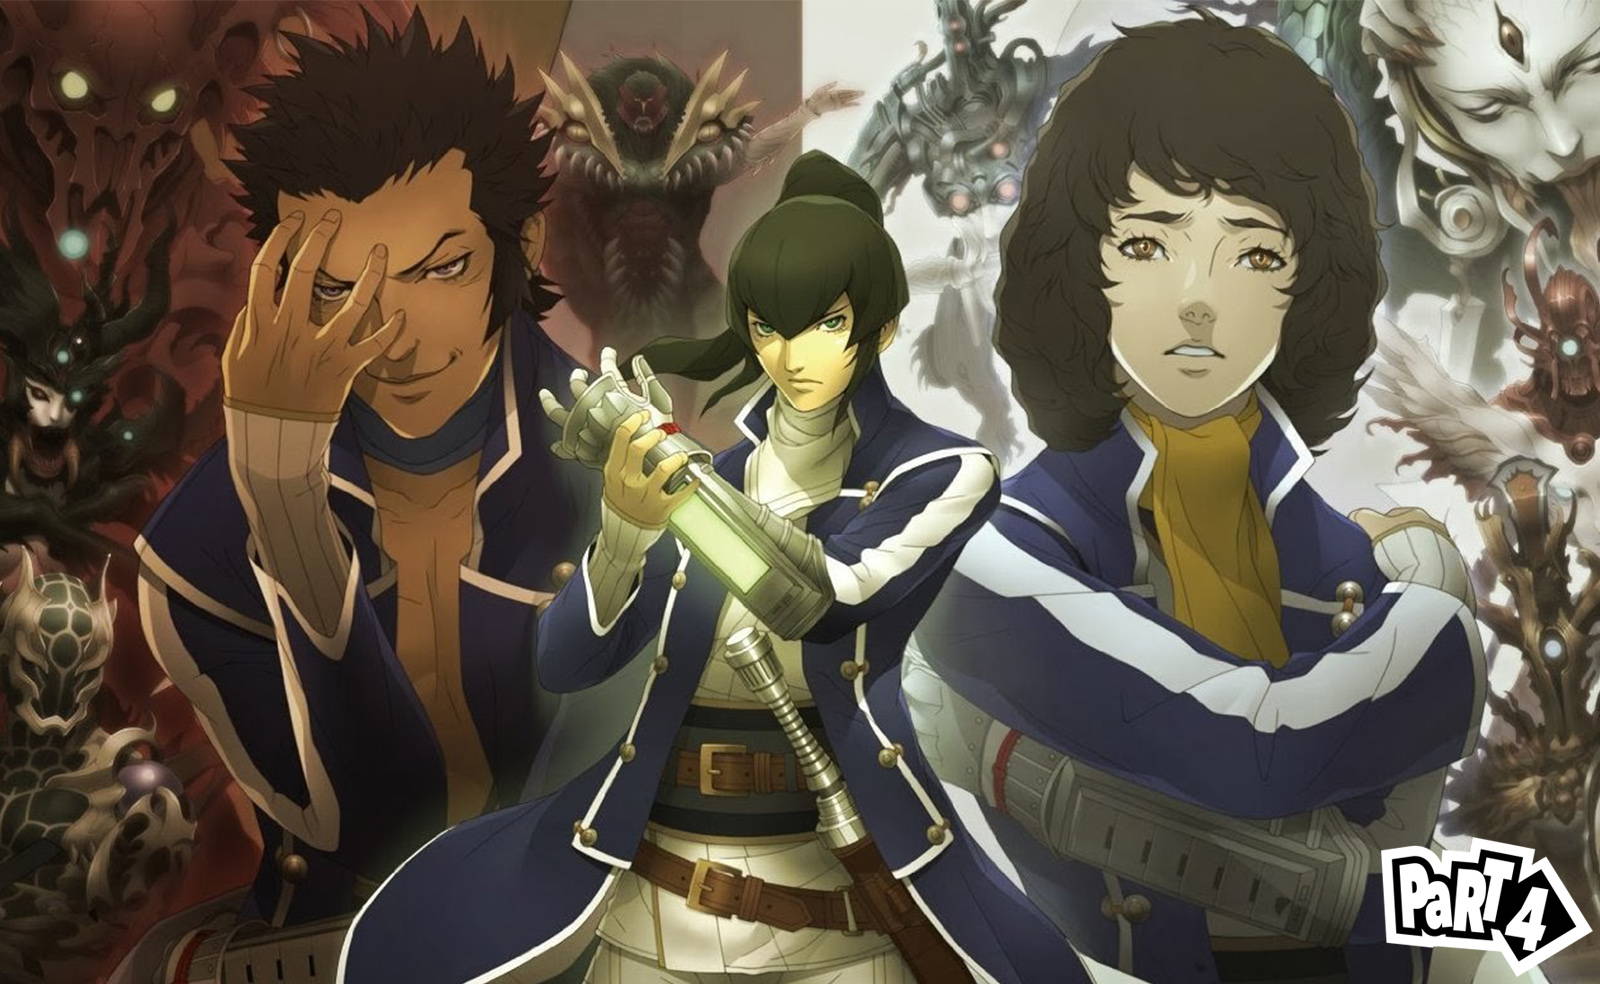 So You've Finished Persona 5. What's Next? (Part 4: Shin Megami Tensei IV))